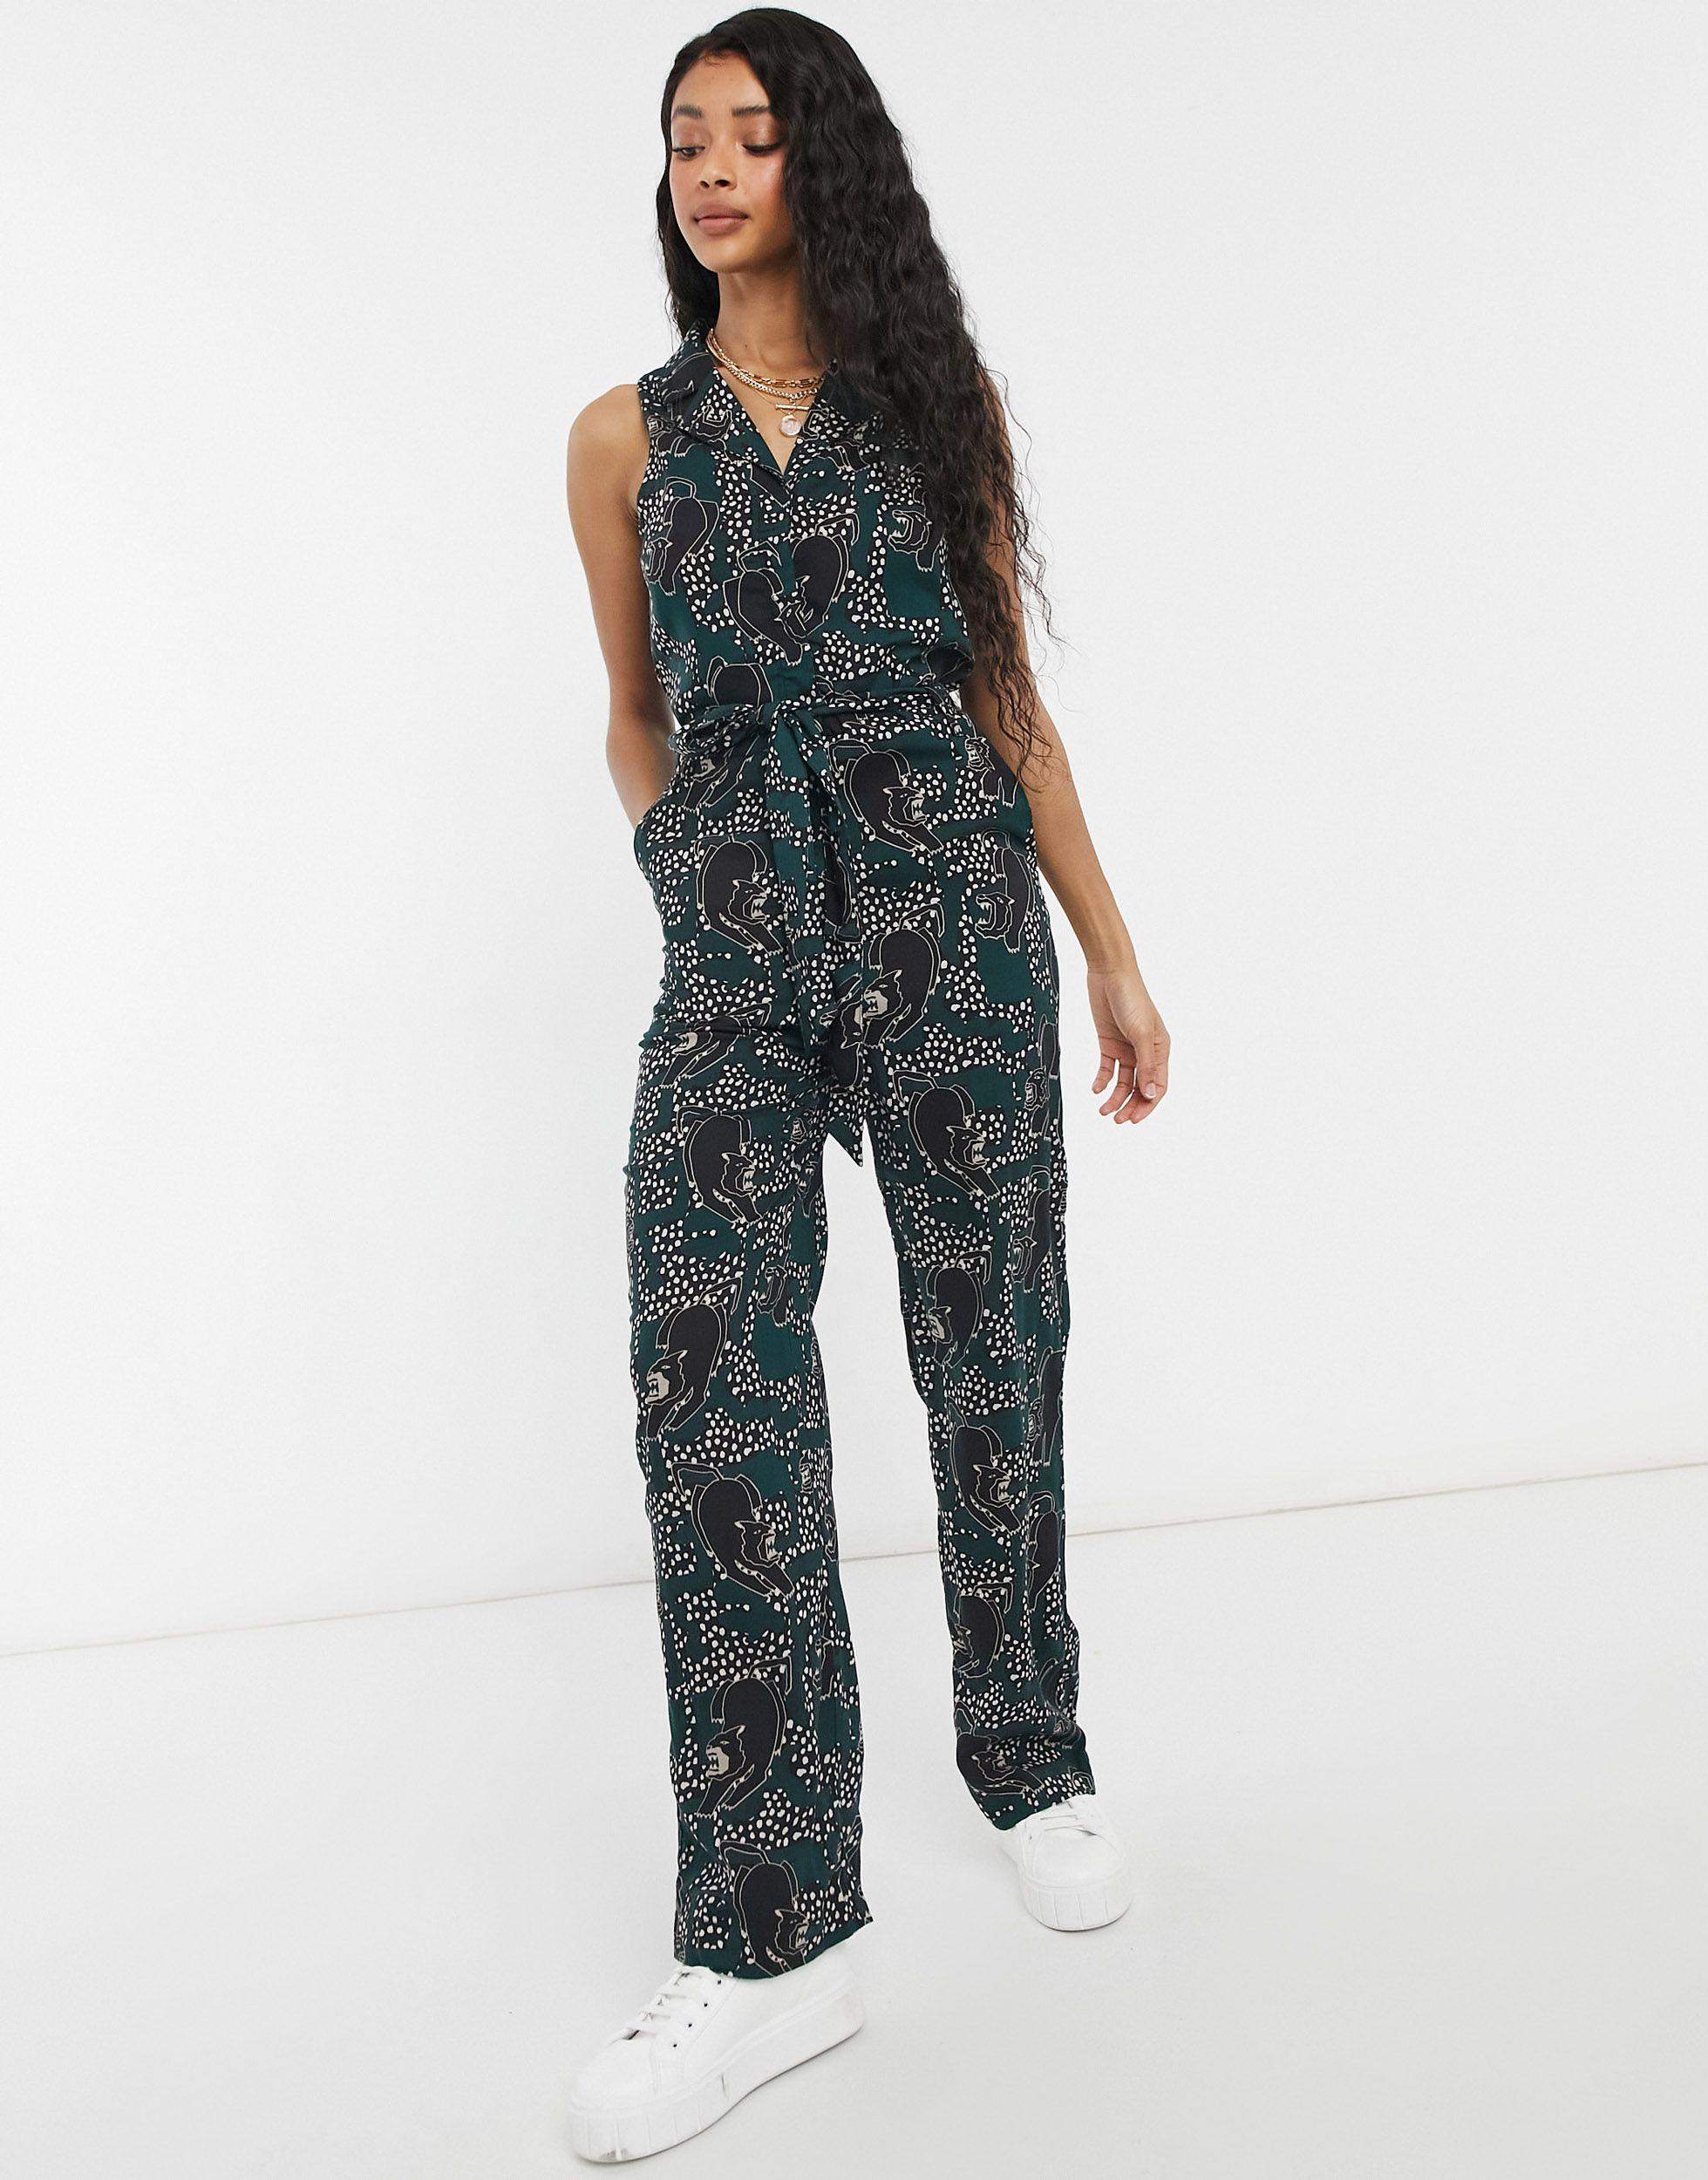 Monki Janelle Belted Sleeveless Panther Print Jumpsuit | Lyst